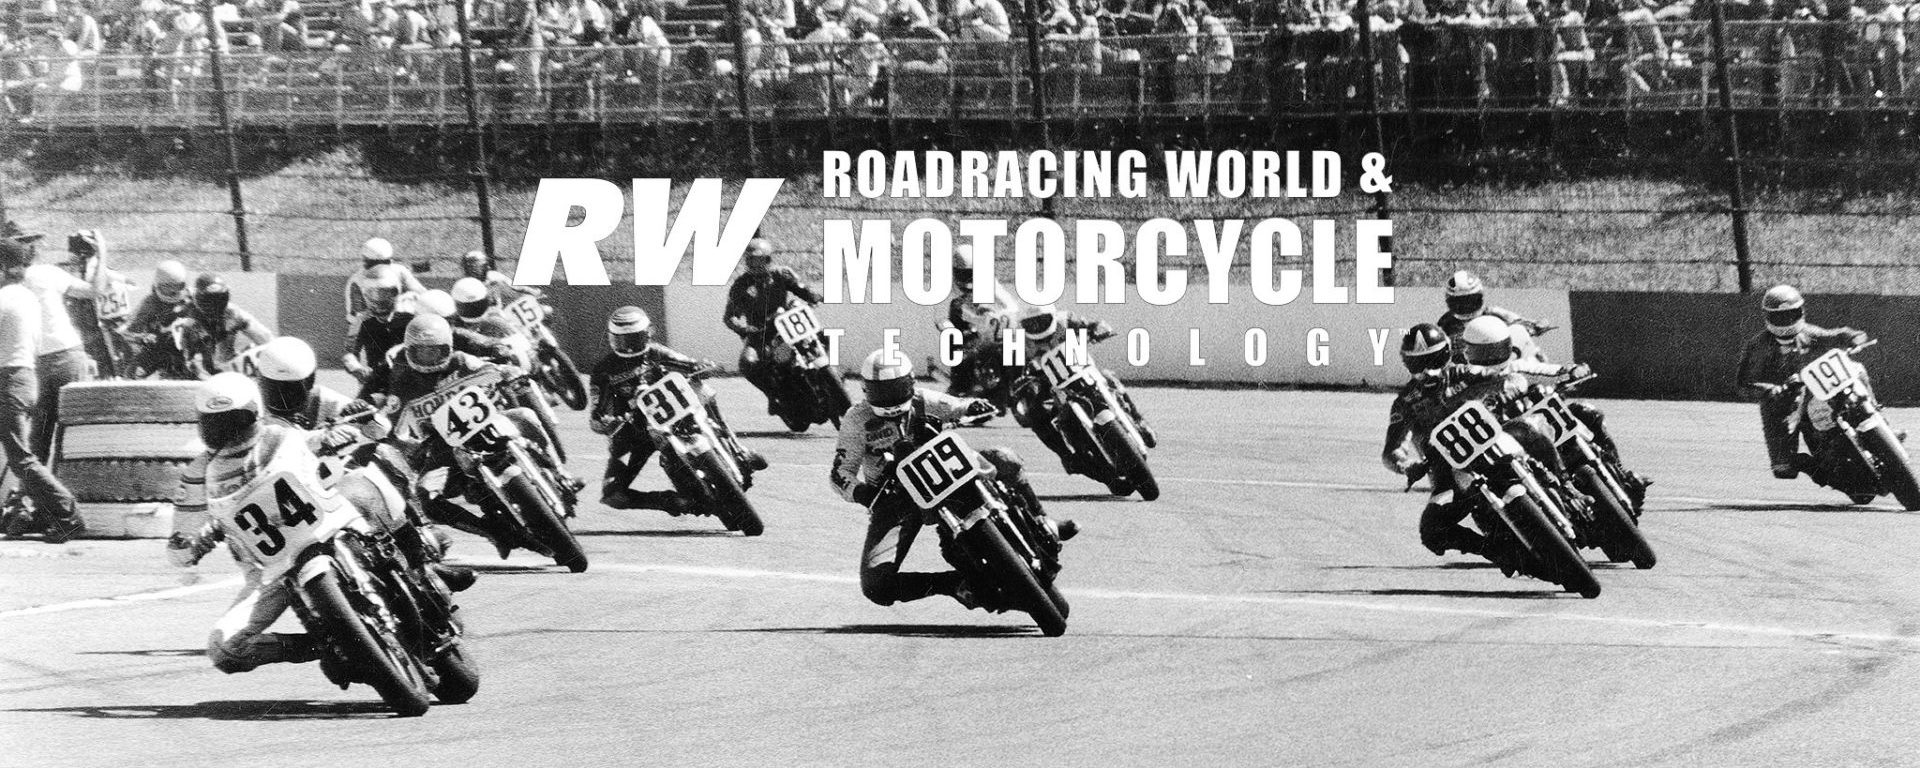 Wes Cooley (34) at the start of an AMA Superbike race at Pocono Raceway in 1980, chased by David Aldana (109), Roberto Pietri (88), Mike Baldwin (43), Harry Klinzmann (31) and the rest. Photo by Mary Grothe.